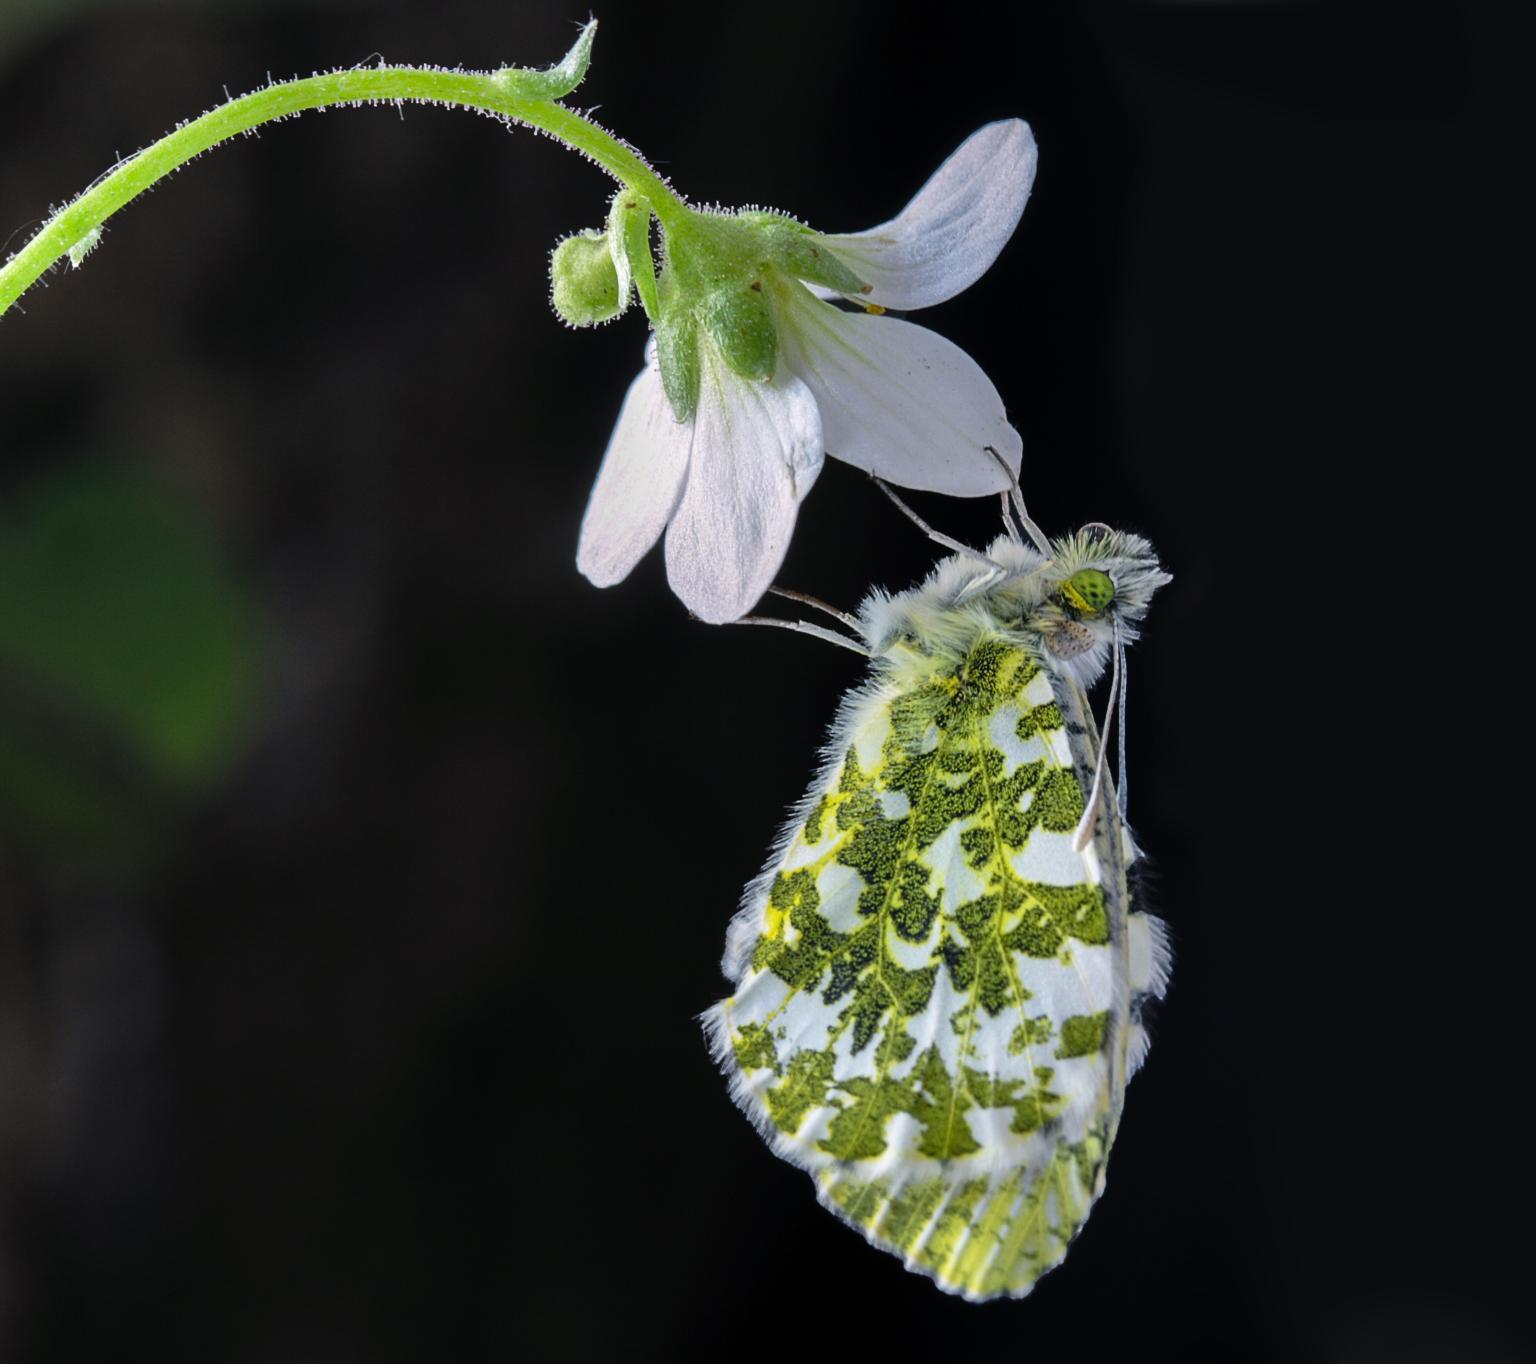 Orange tip butterfly    Picture: Pixabay